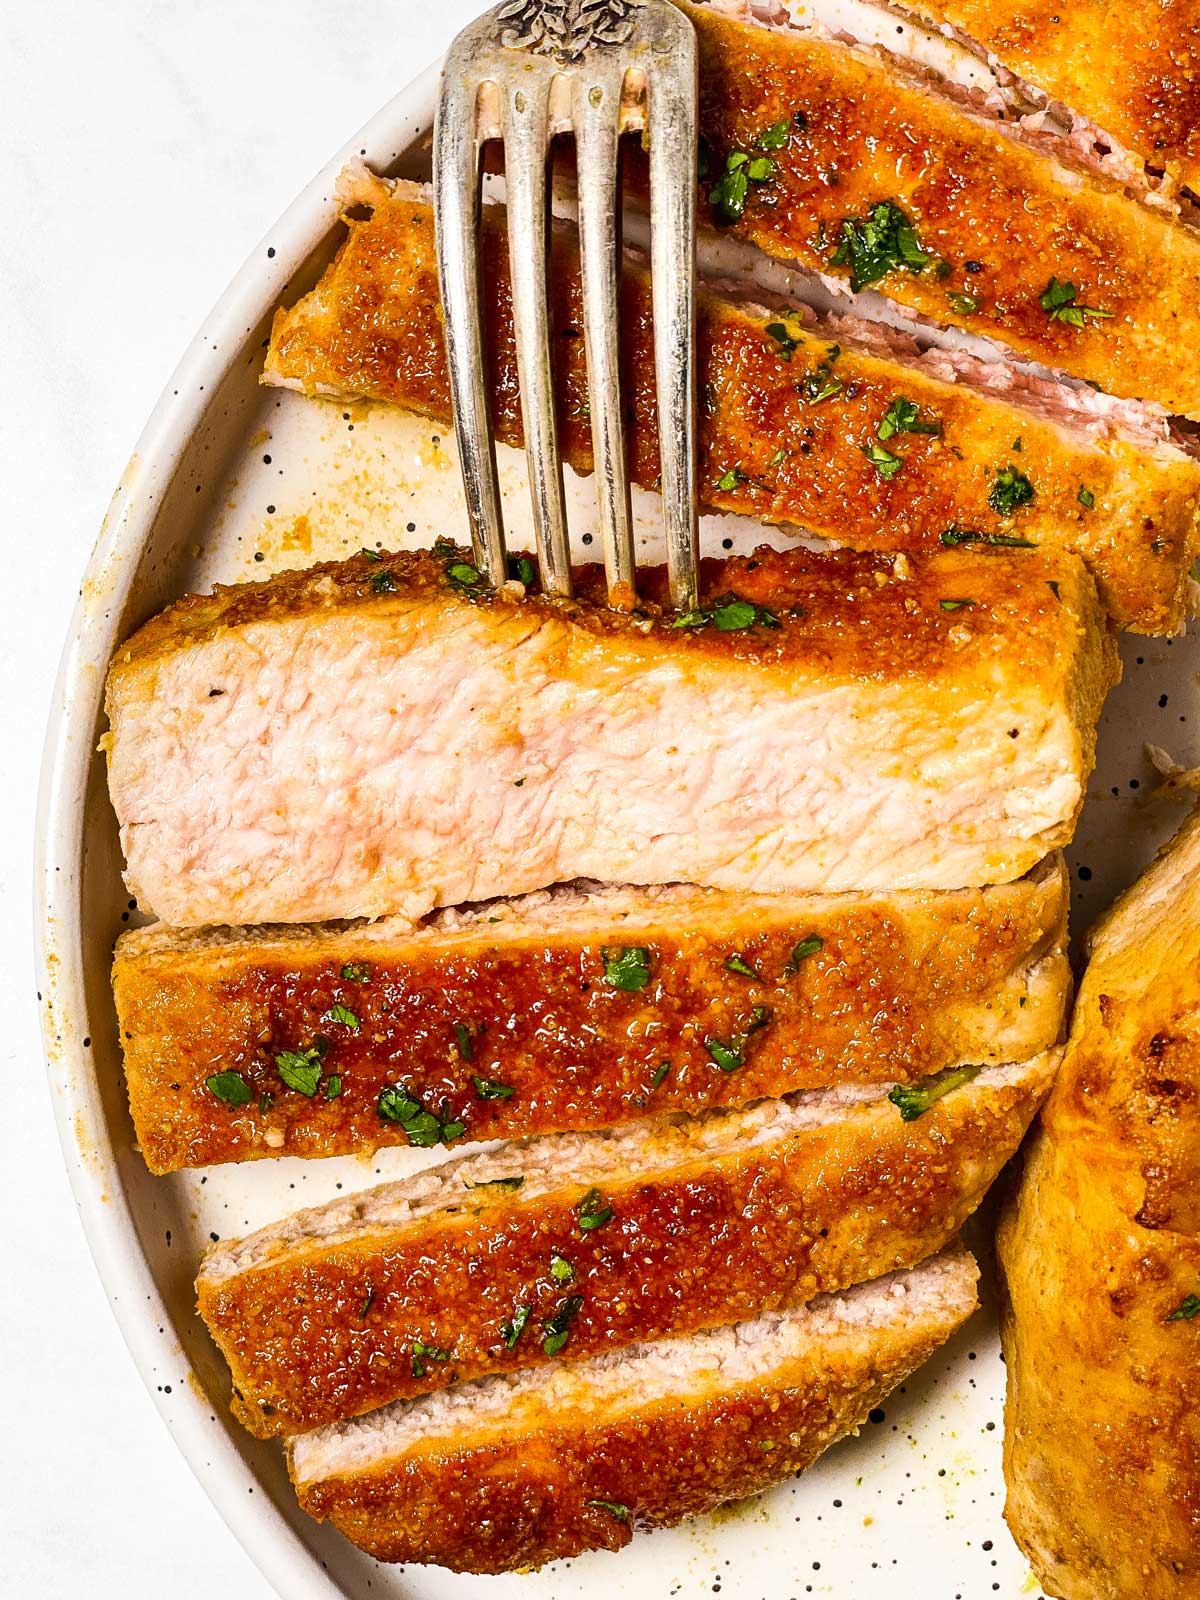 How Long to Cook Pork Breast in Oven? 